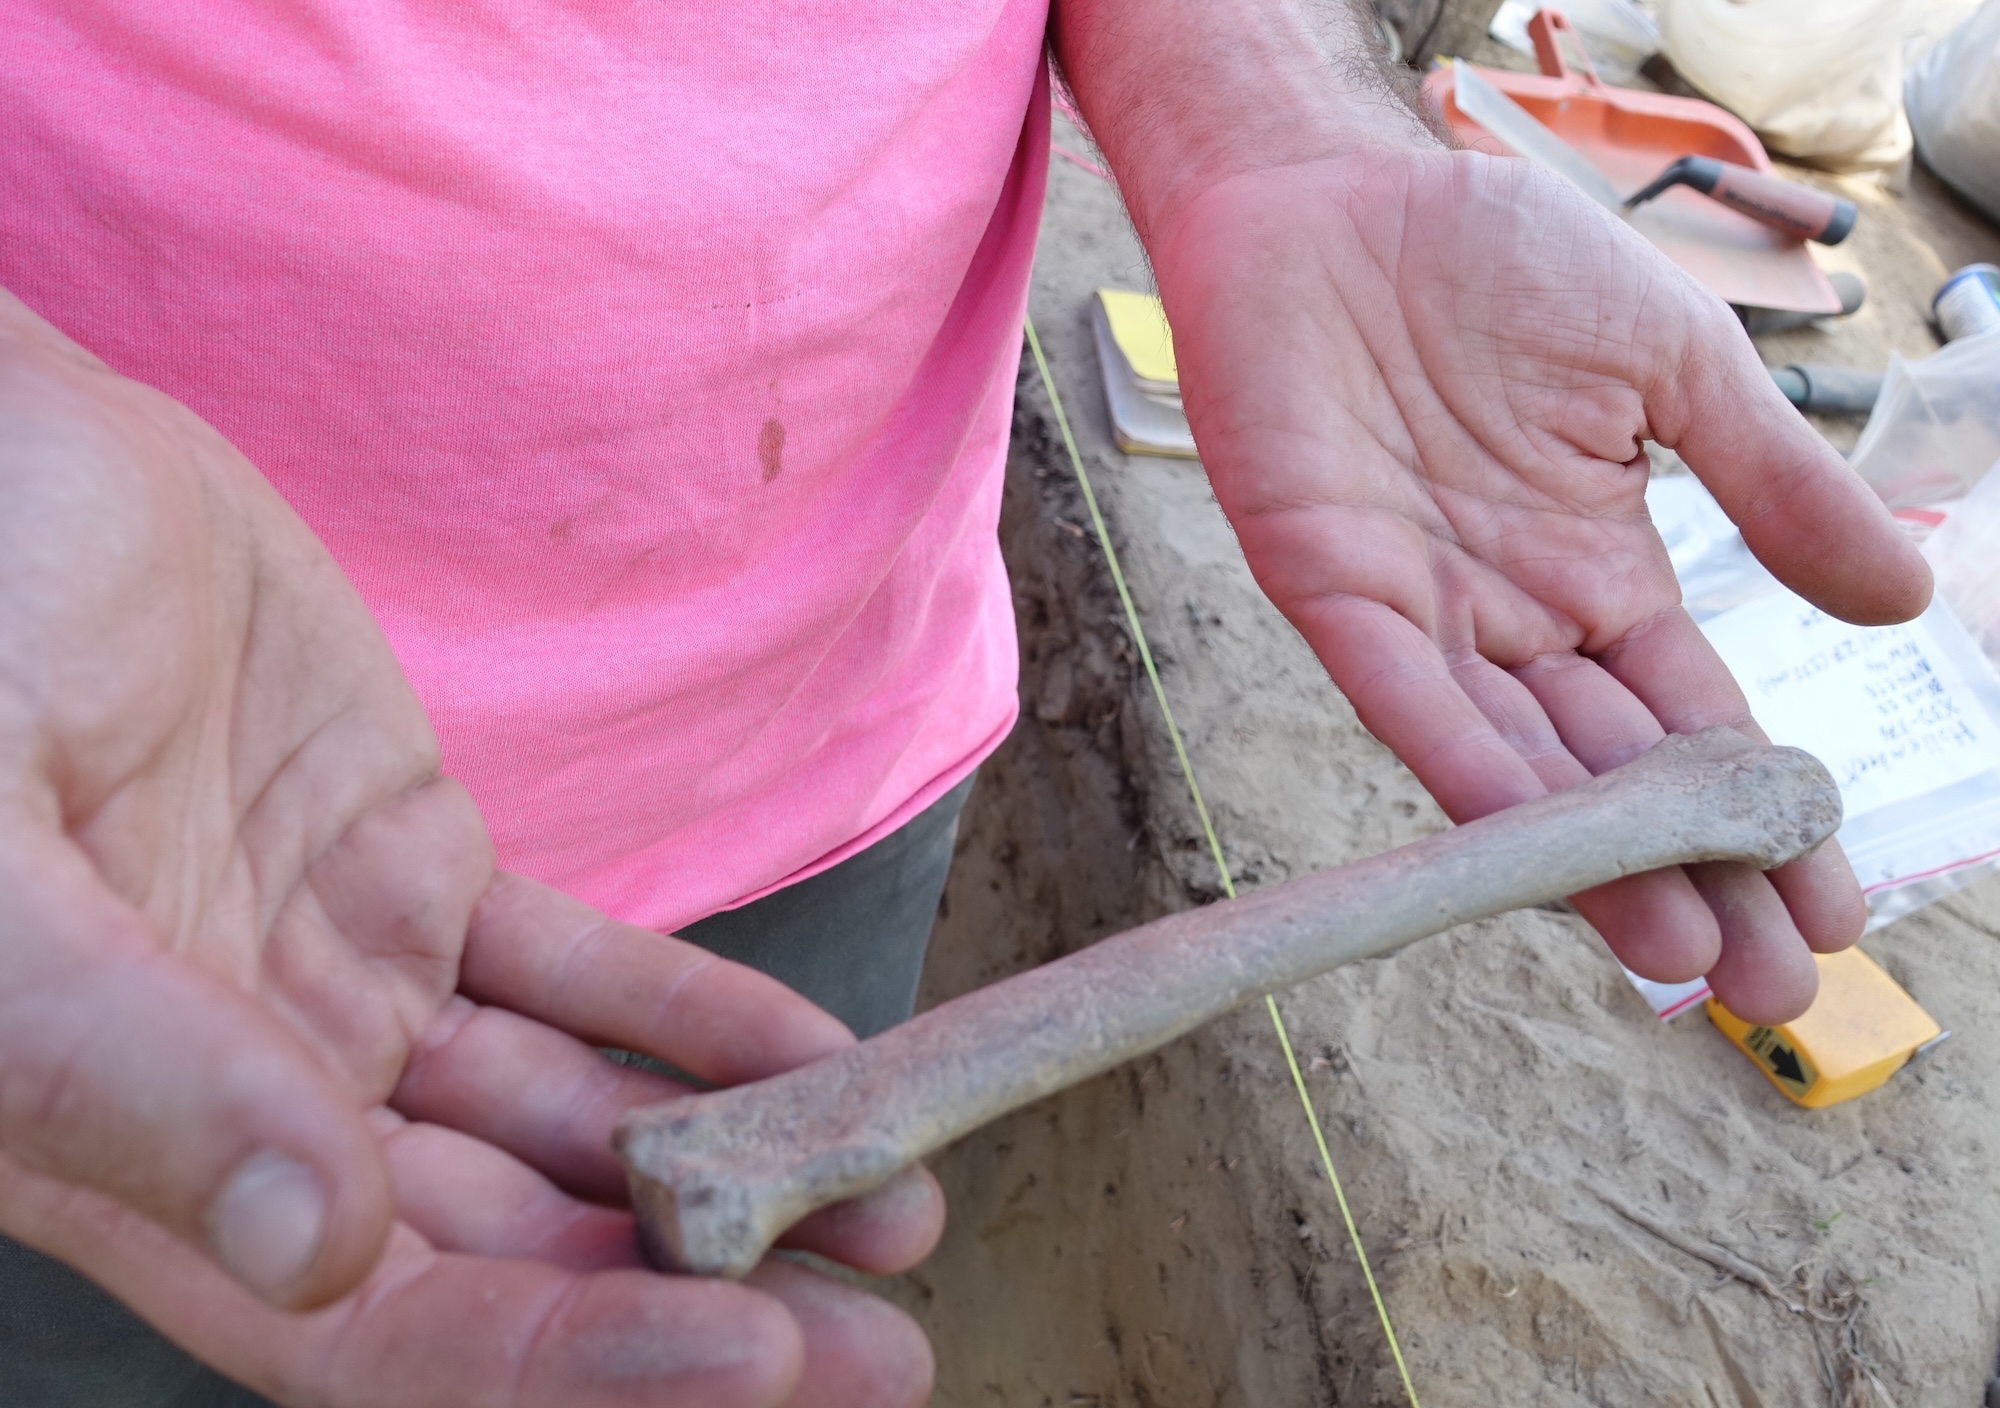 A person wearing a pink shirt holds a bone in their two hands. Behind and below is an area of dirt marked off with string and strewn with archaeology tools, including plastic collection bags and a tape measure, trowel and notebook.